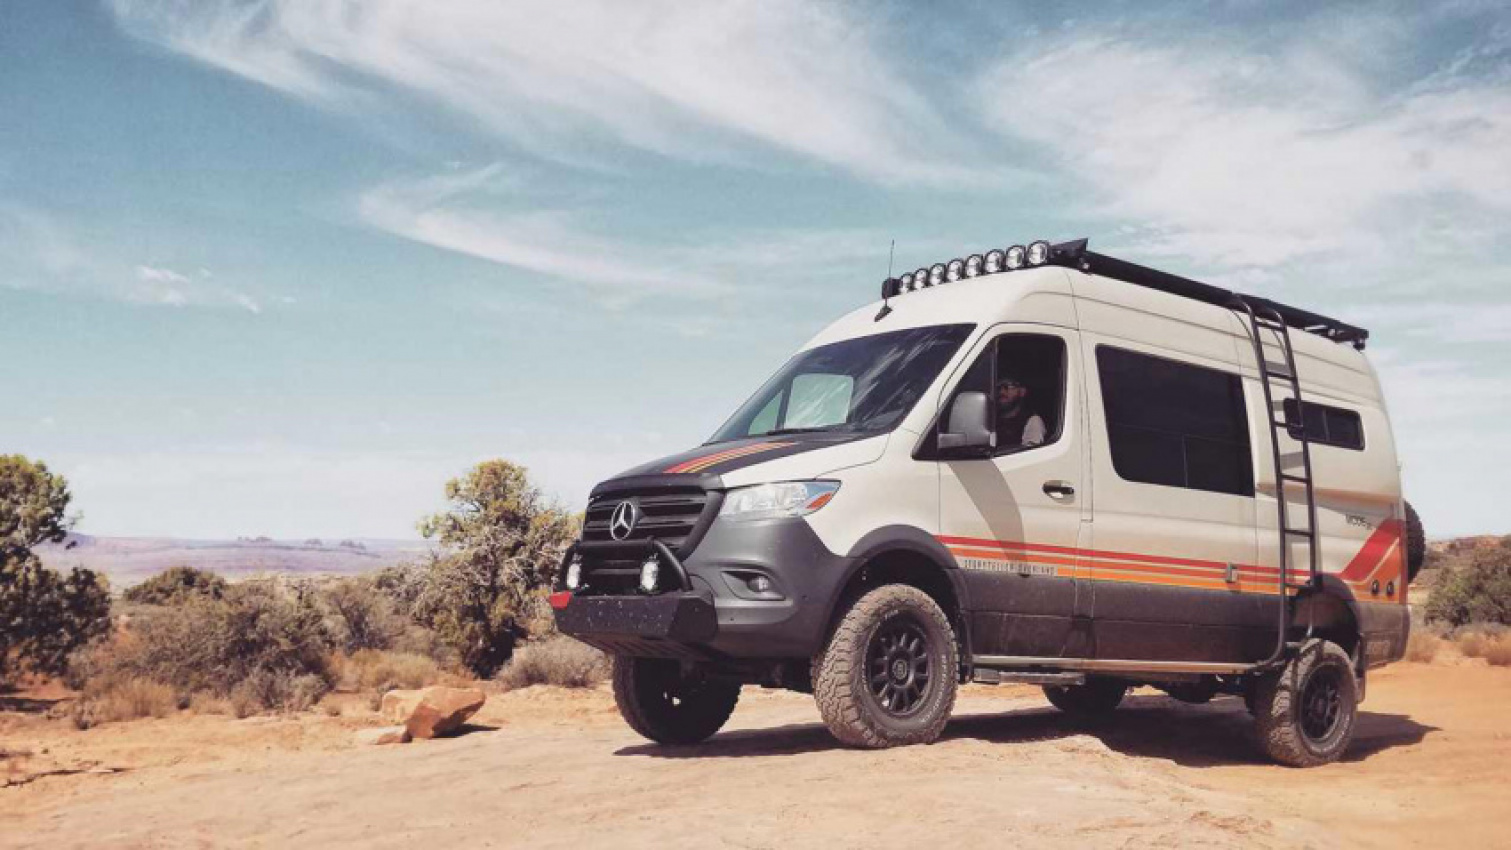 acer, autos, cars, storyteller overland adquiere gxv para hacer campers offroad